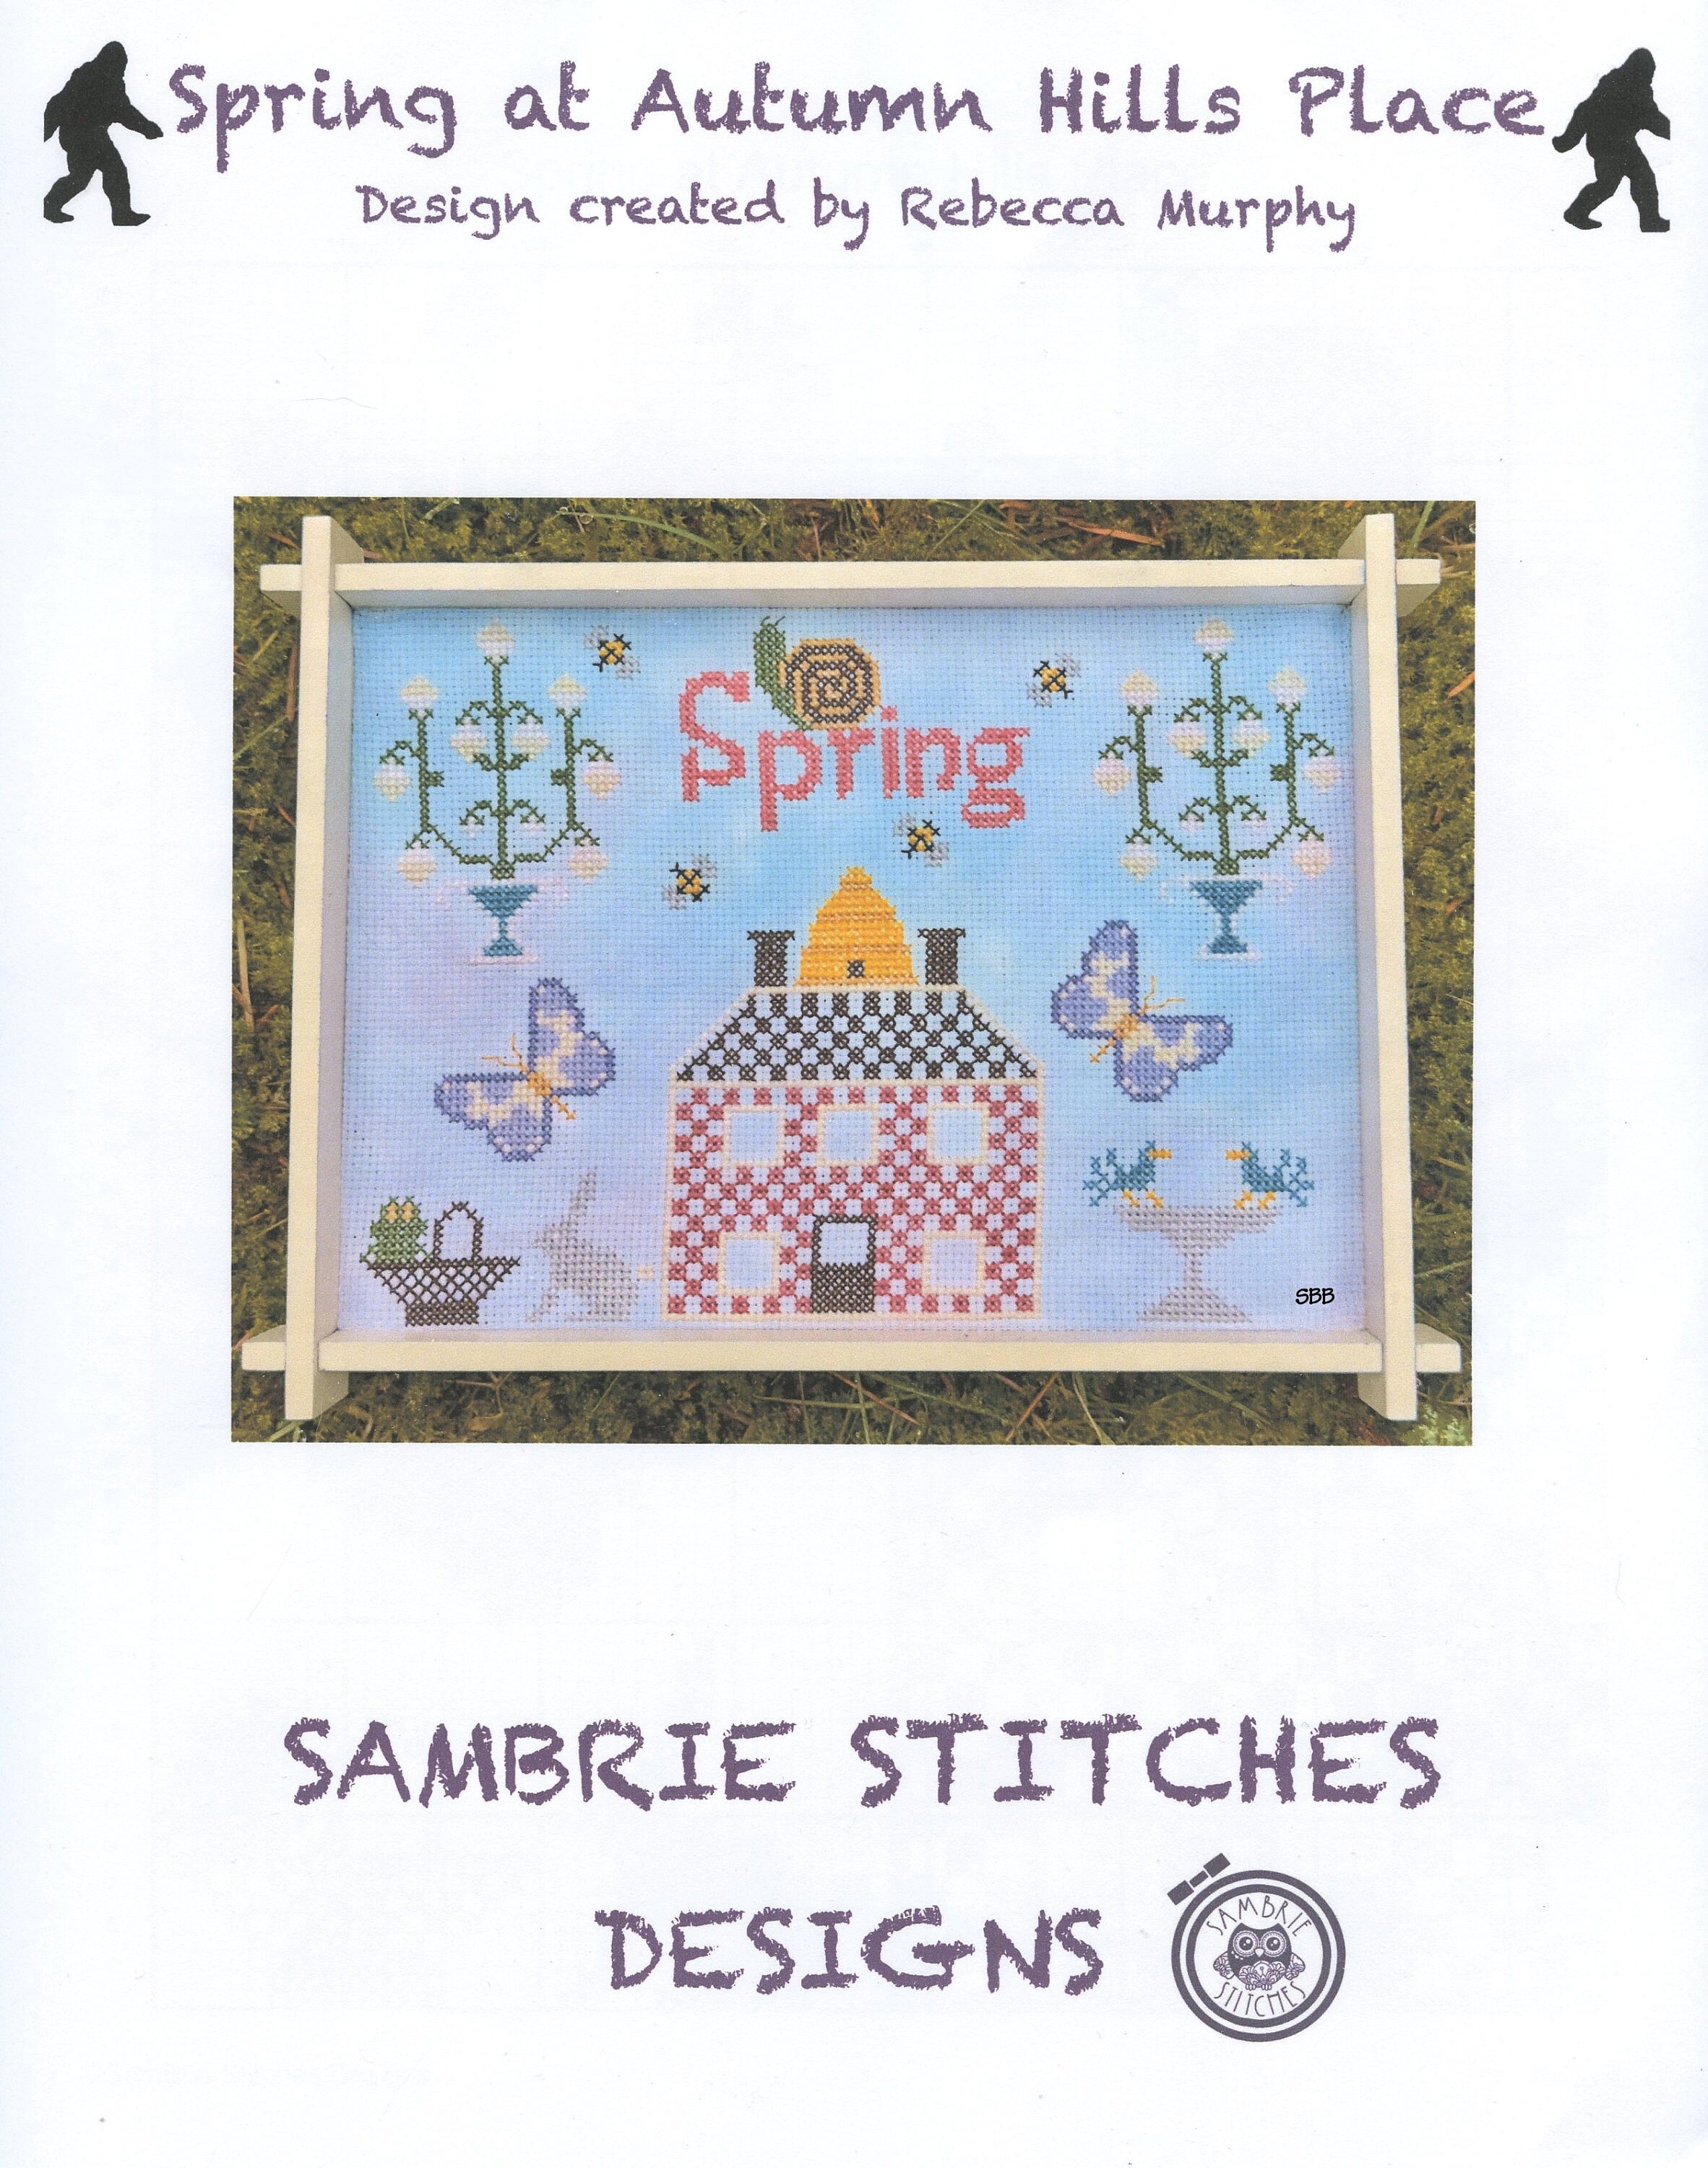 A-Z of Embroidery Stitches by Sue Gardner